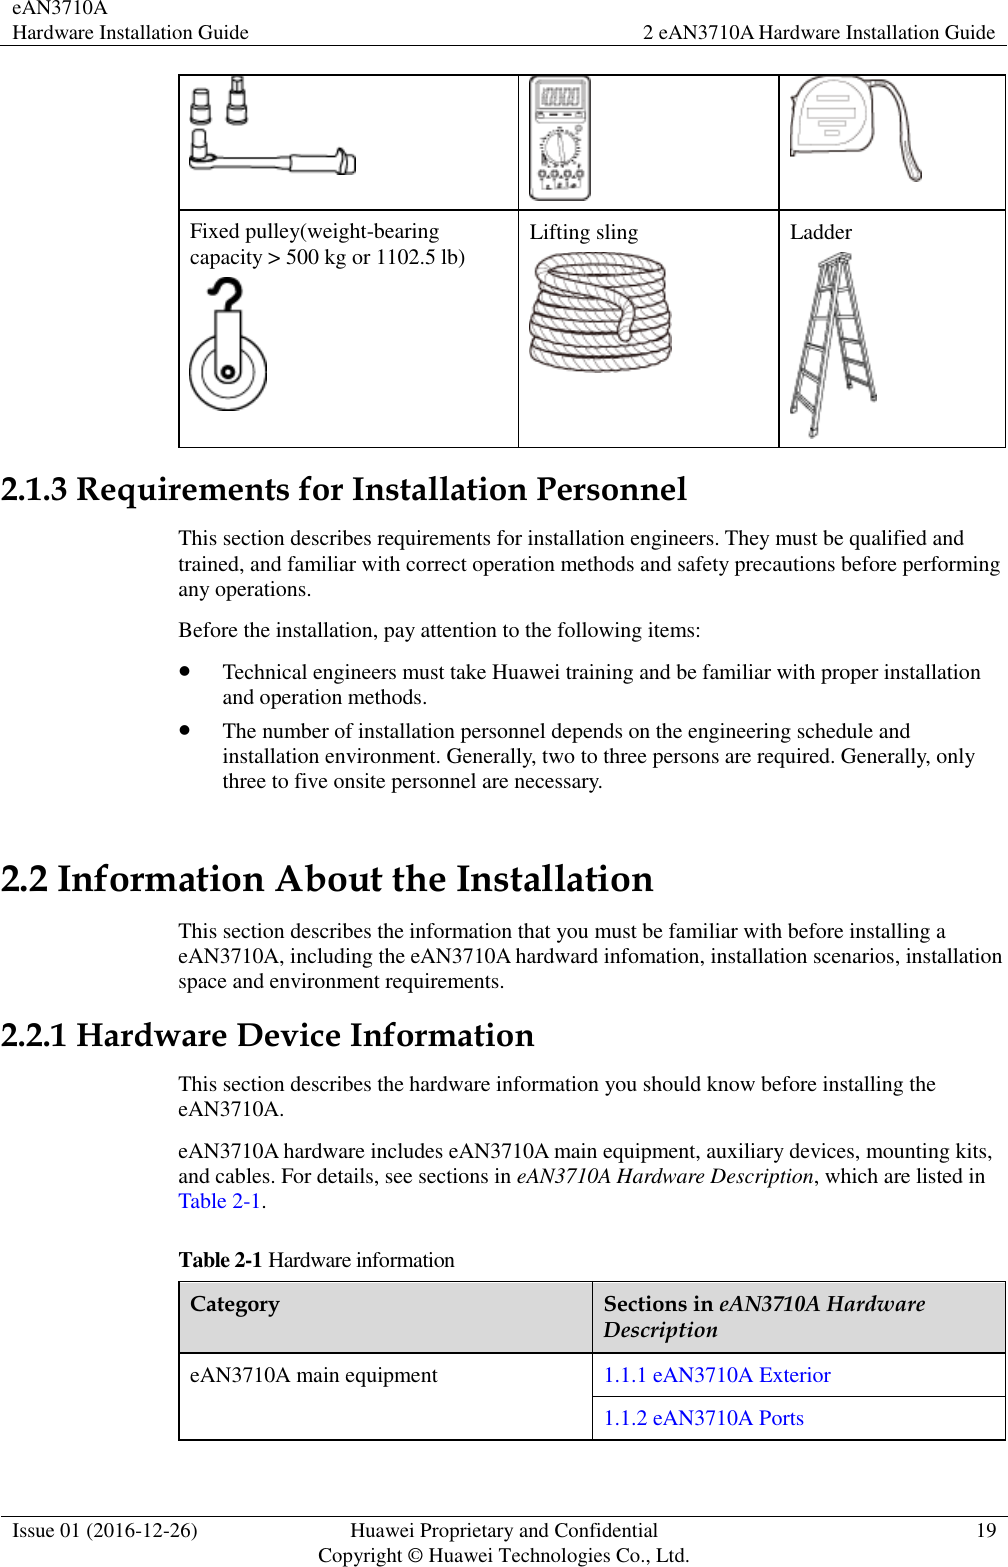 eAN3710A Hardware Installation Guide 2 eAN3710A Hardware Installation Guide  Issue 01 (2016-12-26) Huawei Proprietary and Confidential                                     Copyright © Huawei Technologies Co., Ltd. 19     Fixed pulley(weight-bearing capacity &gt; 500 kg or 1102.5 lb)  Lifting sling  Ladder  2.1.3 Requirements for Installation Personnel This section describes requirements for installation engineers. They must be qualified and trained, and familiar with correct operation methods and safety precautions before performing any operations. Before the installation, pay attention to the following items:    Technical engineers must take Huawei training and be familiar with proper installation and operation methods.  The number of installation personnel depends on the engineering schedule and installation environment. Generally, two to three persons are required. Generally, only three to five onsite personnel are necessary.   2.2 Information About the Installation This section describes the information that you must be familiar with before installing a eAN3710A, including the eAN3710A hardward infomation, installation scenarios, installation space and environment requirements. 2.2.1 Hardware Device Information This section describes the hardware information you should know before installing the eAN3710A. eAN3710A hardware includes eAN3710A main equipment, auxiliary devices, mounting kits, and cables. For details, see sections in eAN3710A Hardware Description, which are listed in Table 2-1. Table 2-1 Hardware information Category Sections in eAN3710A Hardware Description eAN3710A main equipment 1.1.1 eAN3710A Exterior 1.1.2 eAN3710A Ports 